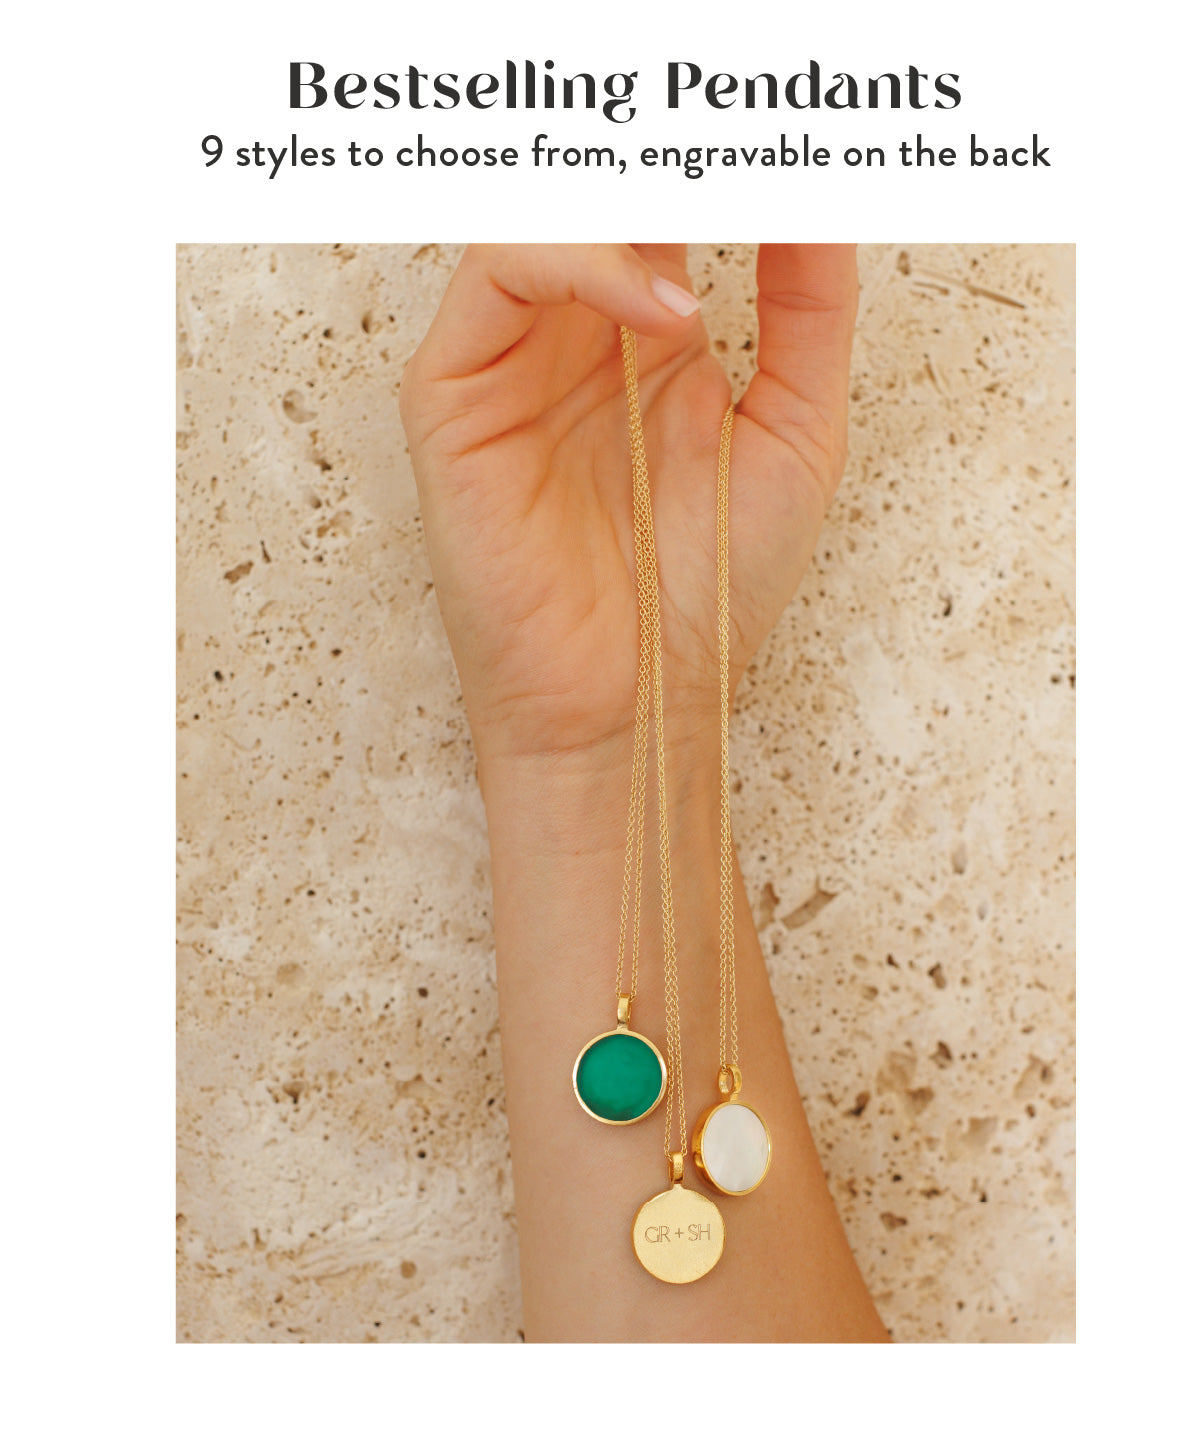 Bestselling pendants. 9 styles to choose from, engravable on the back.